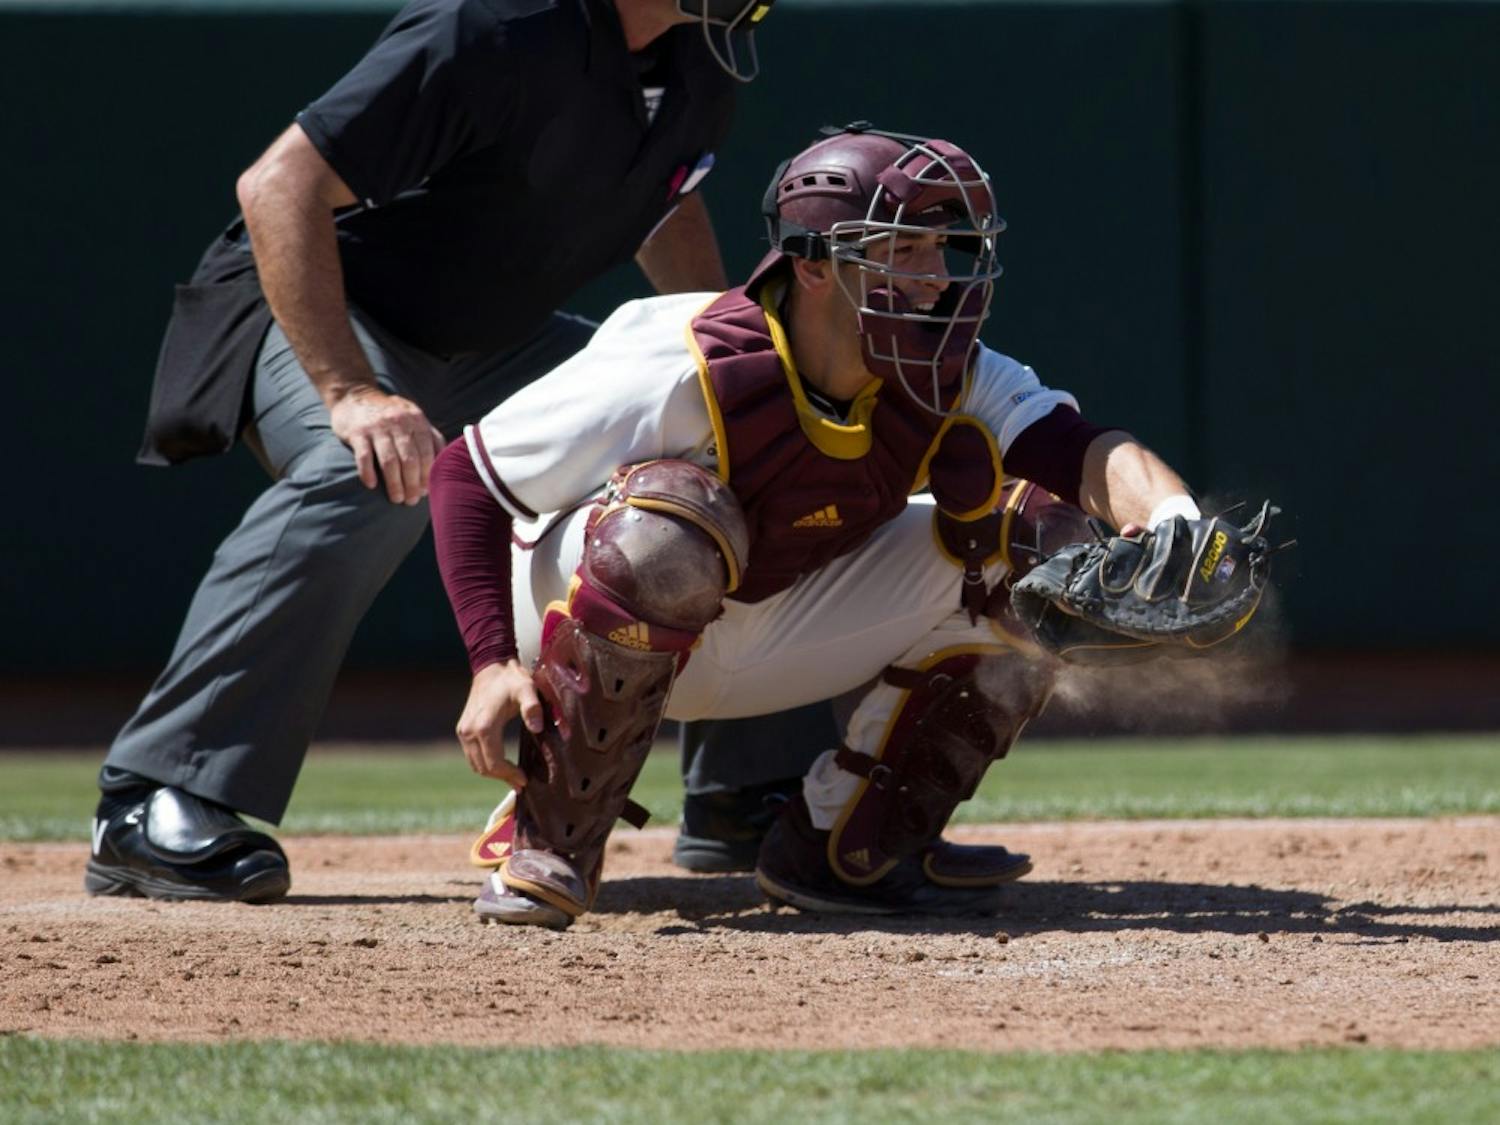 ASU senior catcher Zach Cerbo (30) catches a pitch during game three of a baseball series against the UCLA Bruins at Phoenix Municipal Stadium in Phoenix on April 2, 2017.